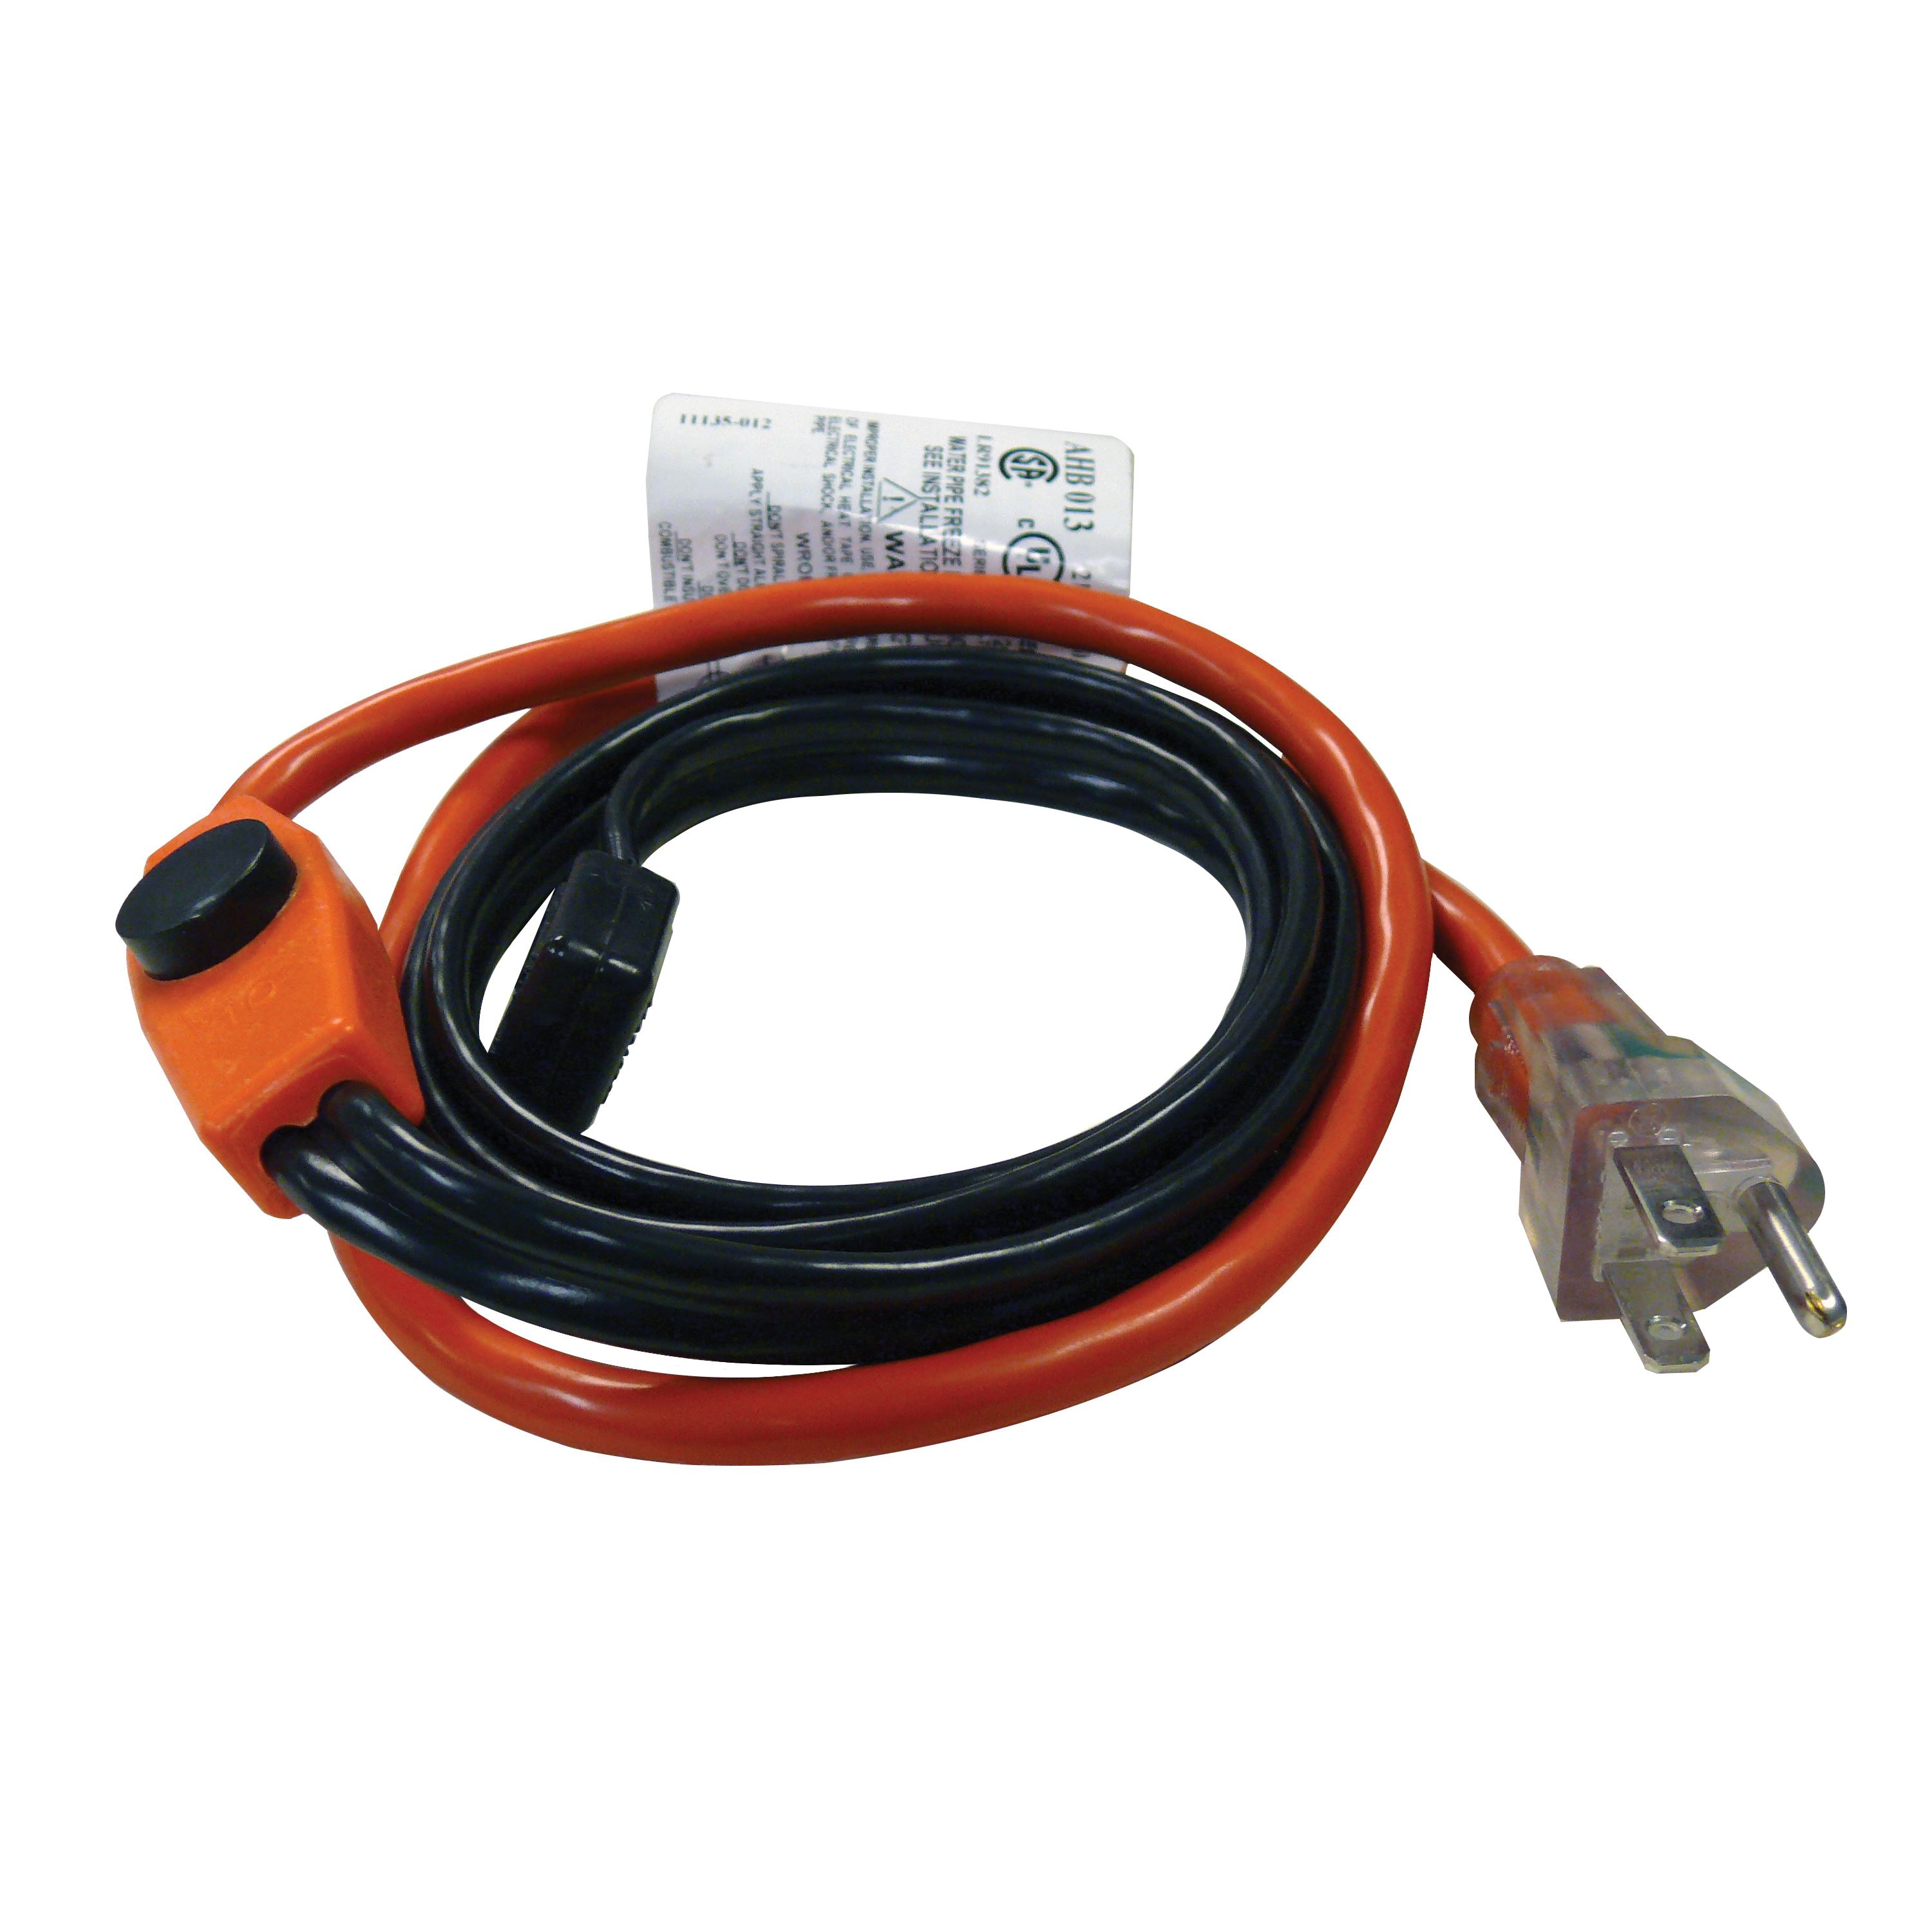 M-d 04366 24' Pipe Heating Cable With Thermostat for sale online 